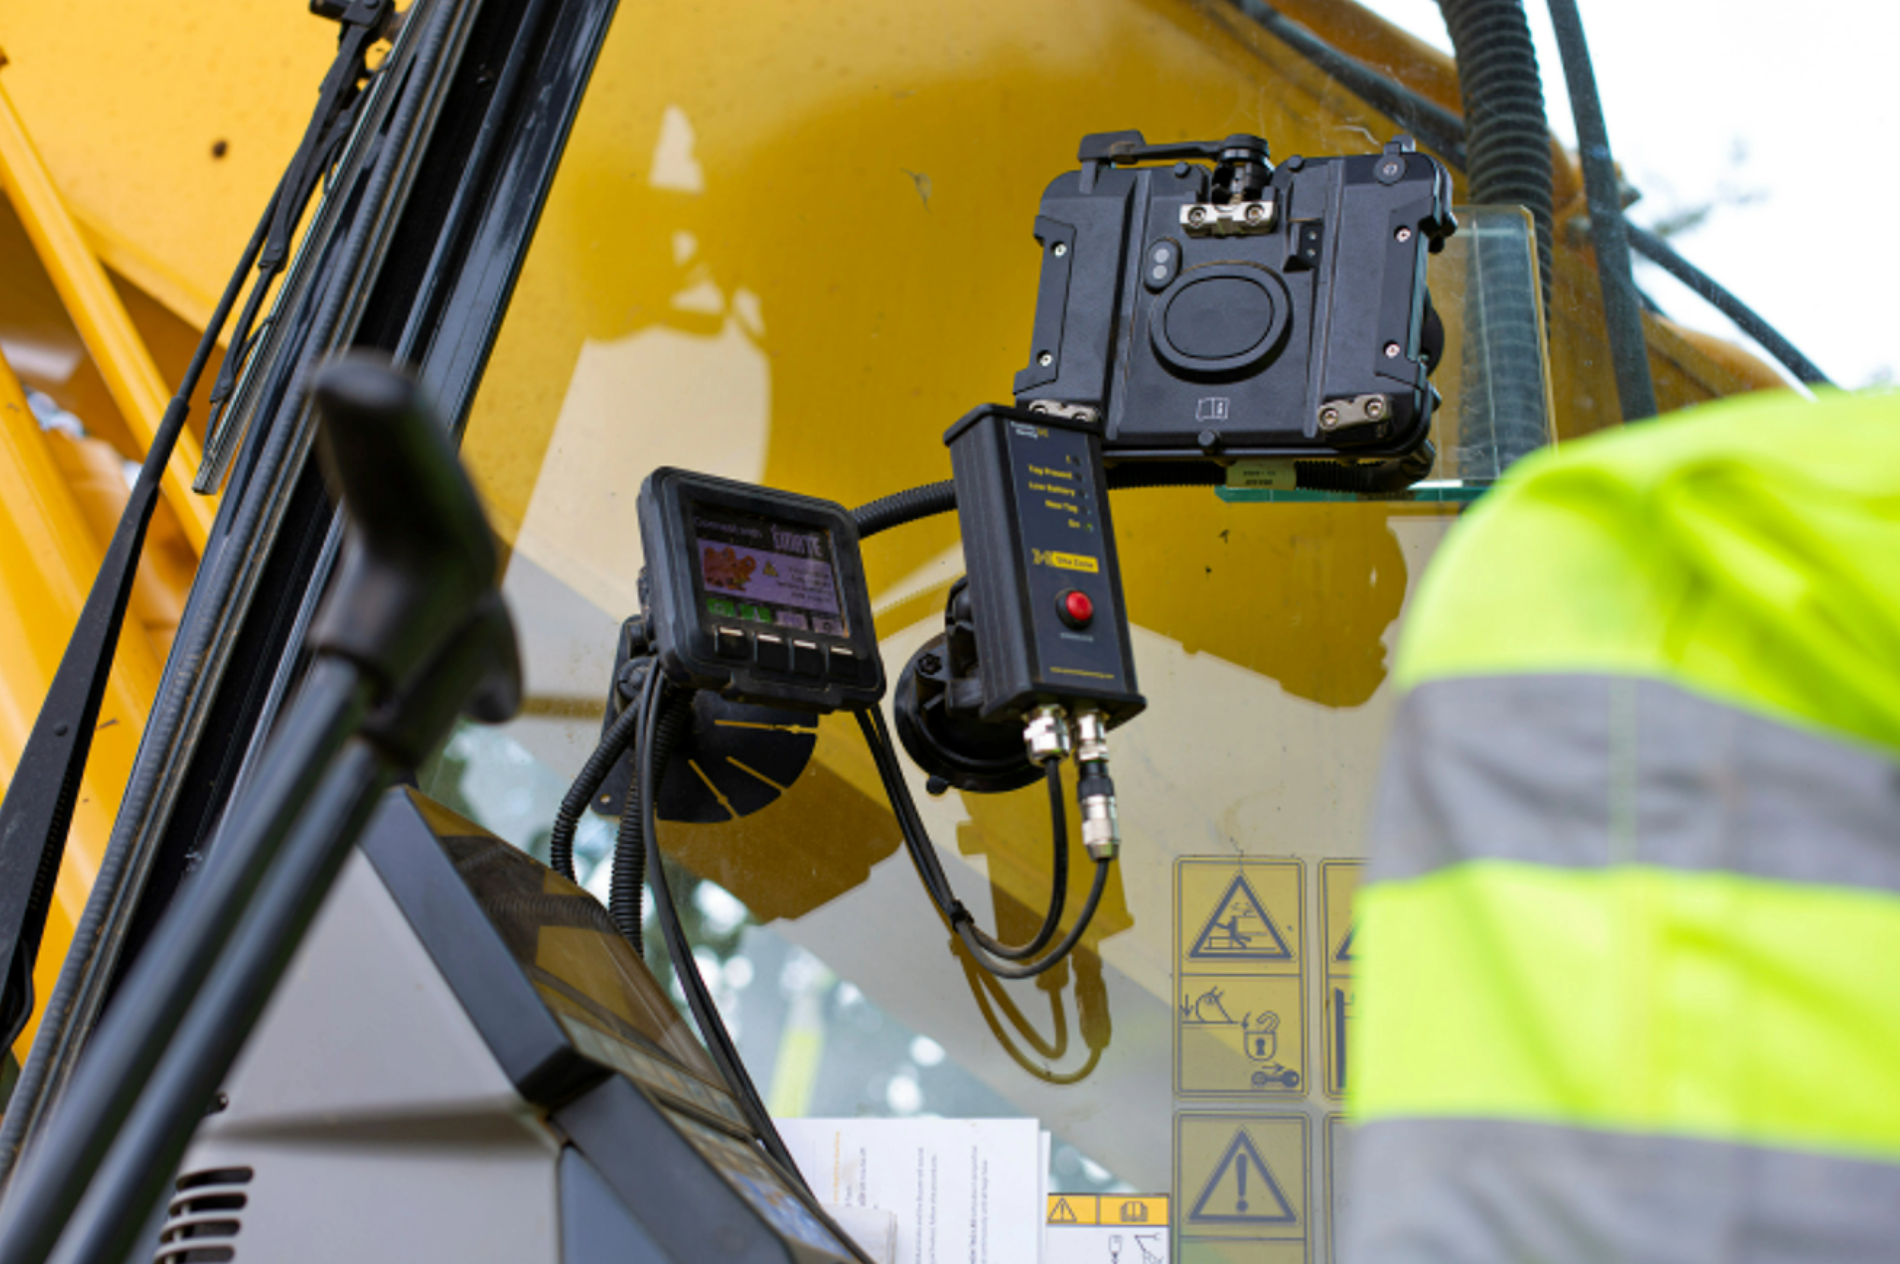 Sitezone proximity warning system in use